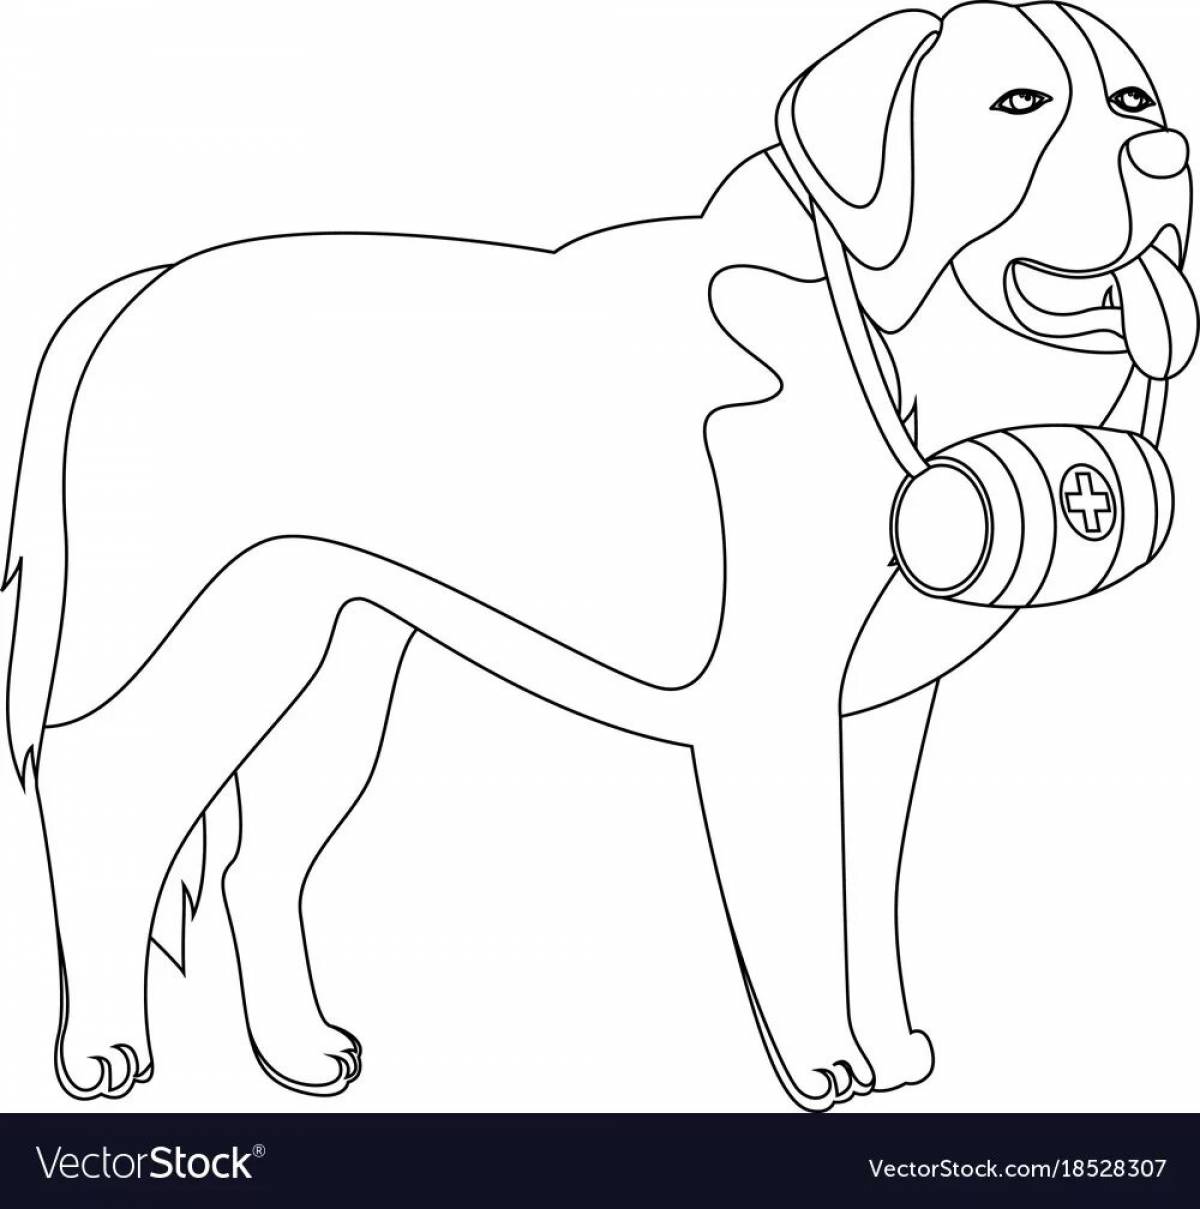 Impressive fire dog coloring page